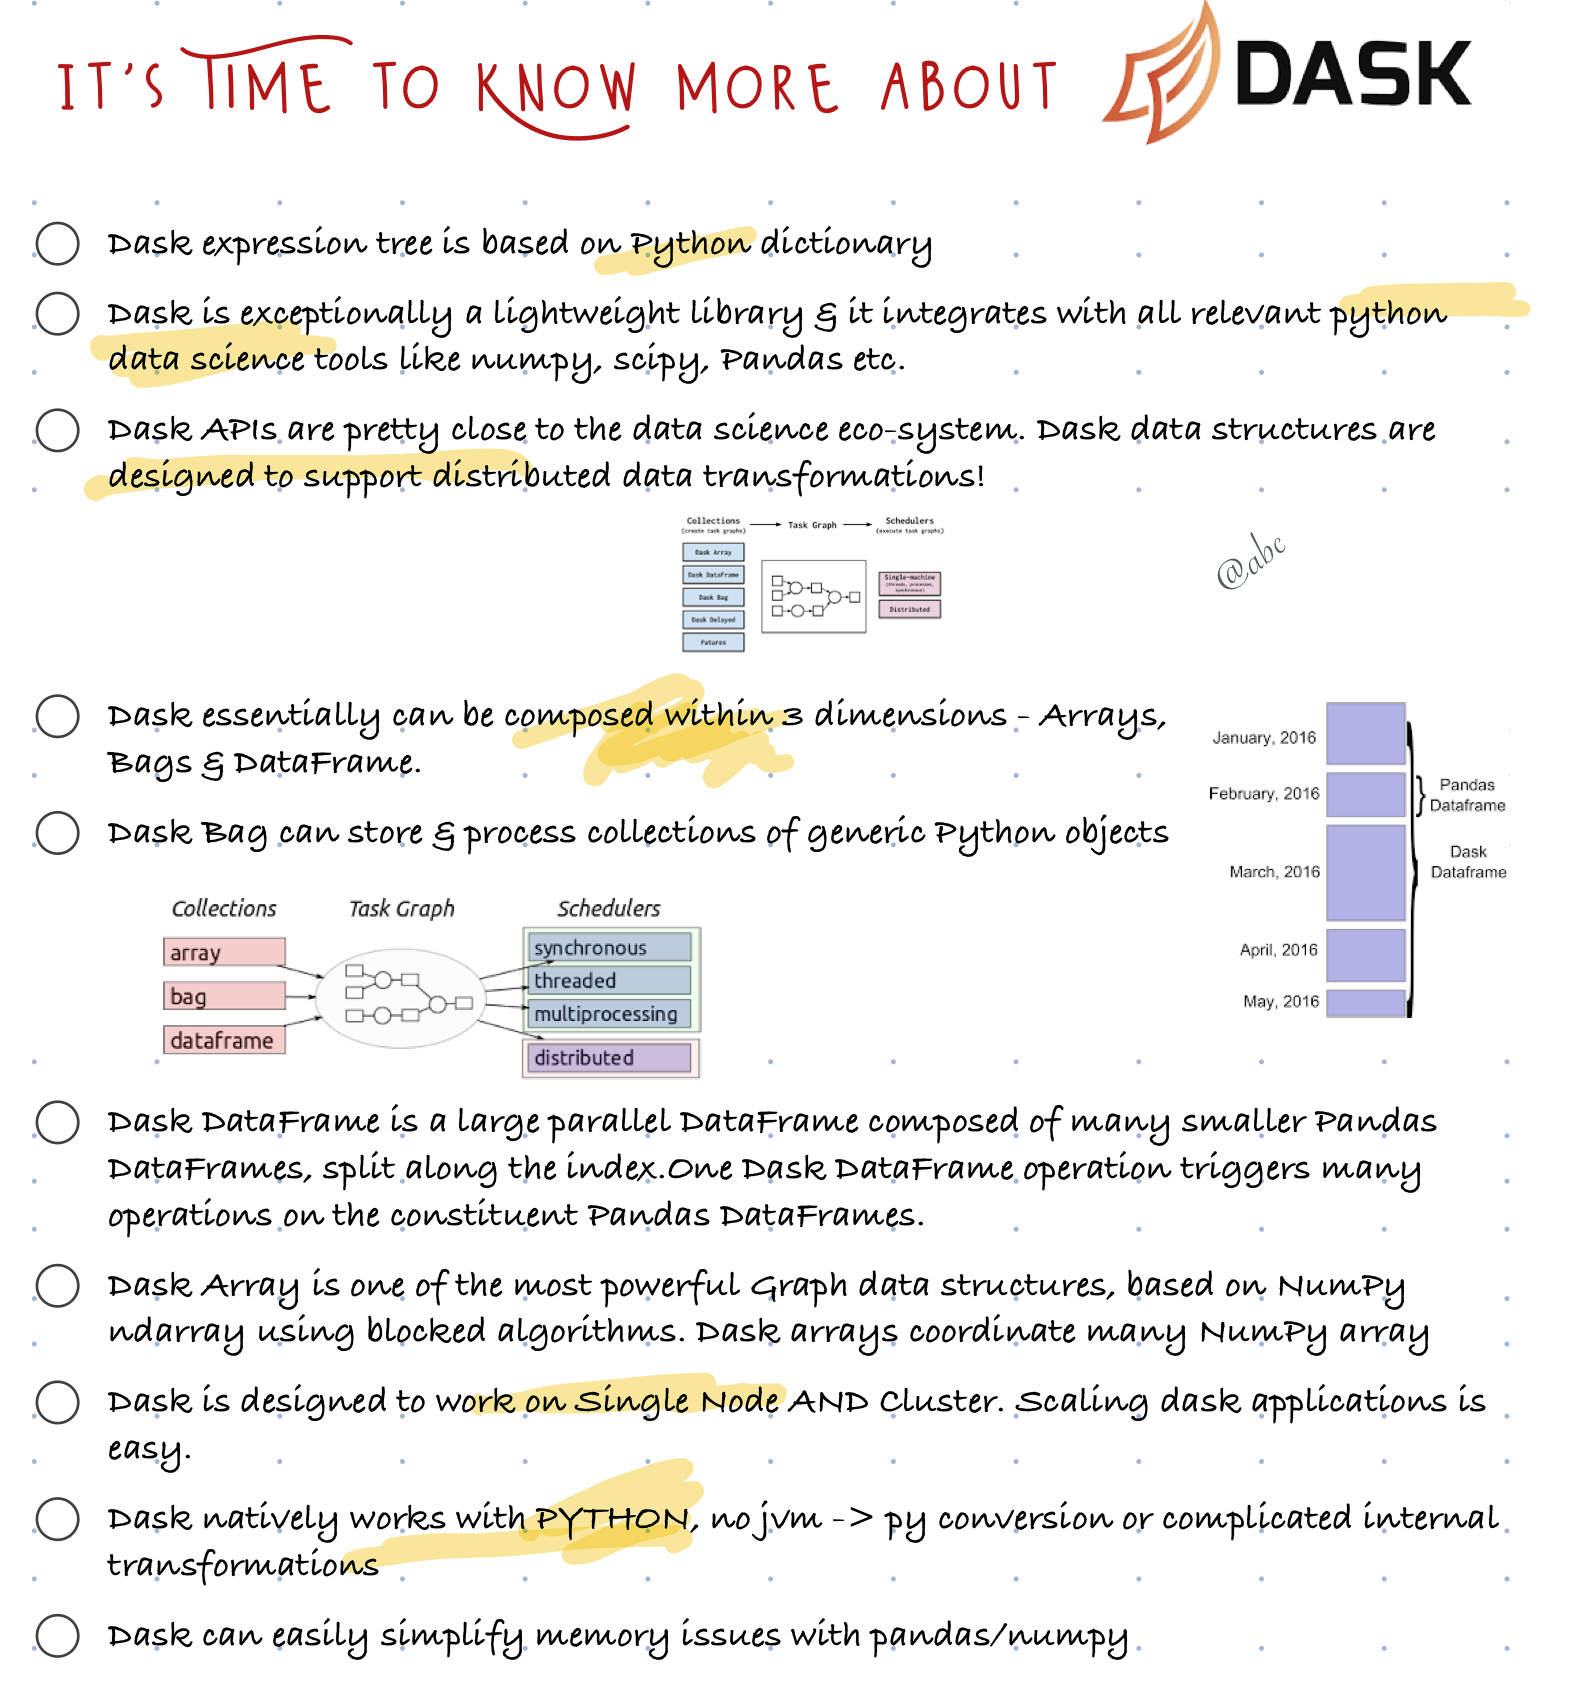 Time to Know More about DASK